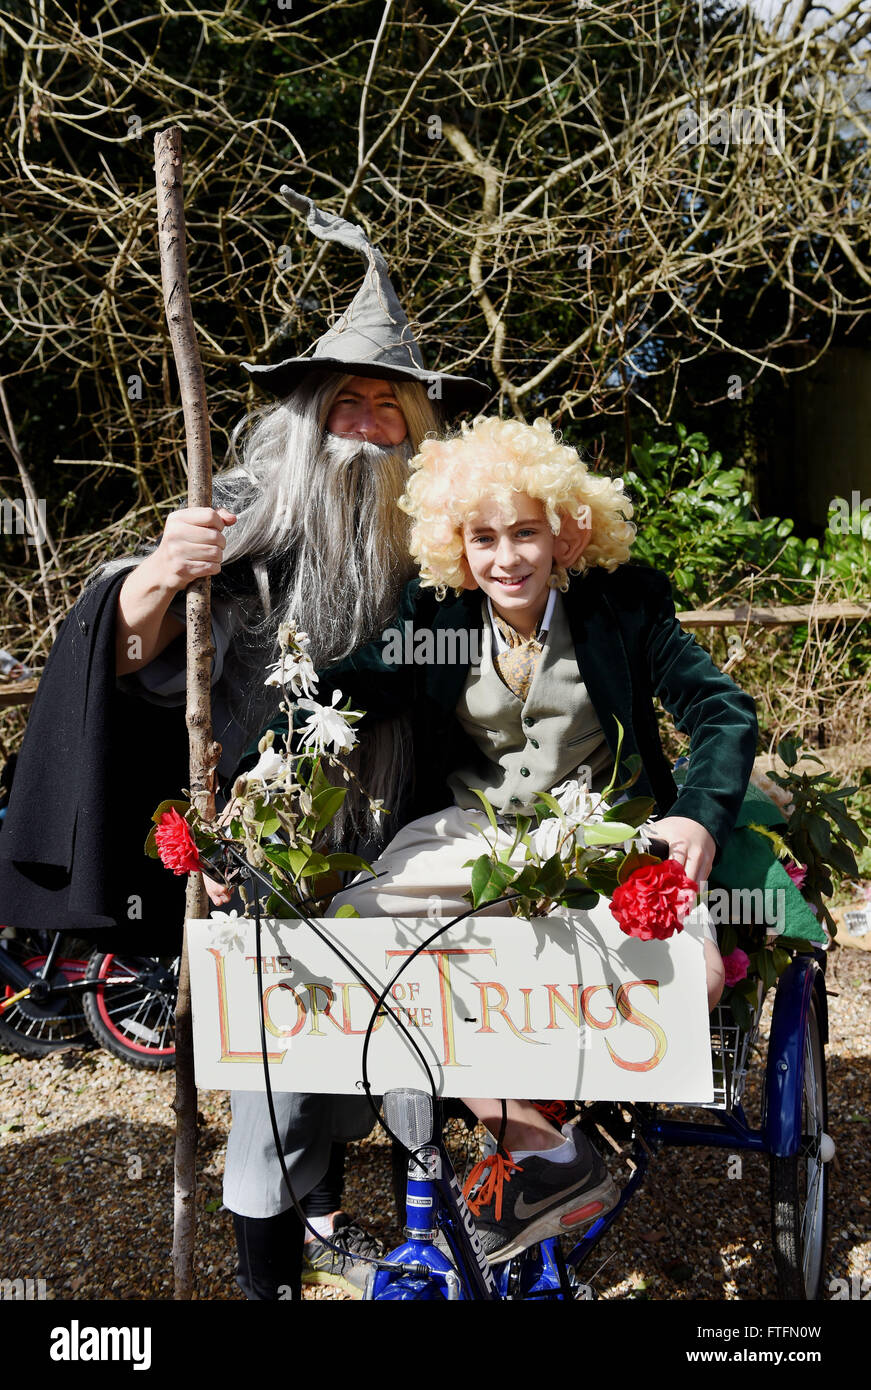 Bolney, Sussex, UK. 28th March, 2016.  Mark and Christian Streater with their entry Lord of the Trings take part in the Bolney Pram Races held every year on Easter Bank Holiday Monday . This year they are raising money for Chailey Heritage and the Service by Emergency Rider Services charities  Credit:  Simon Dack/Alamy Live News Stock Photo